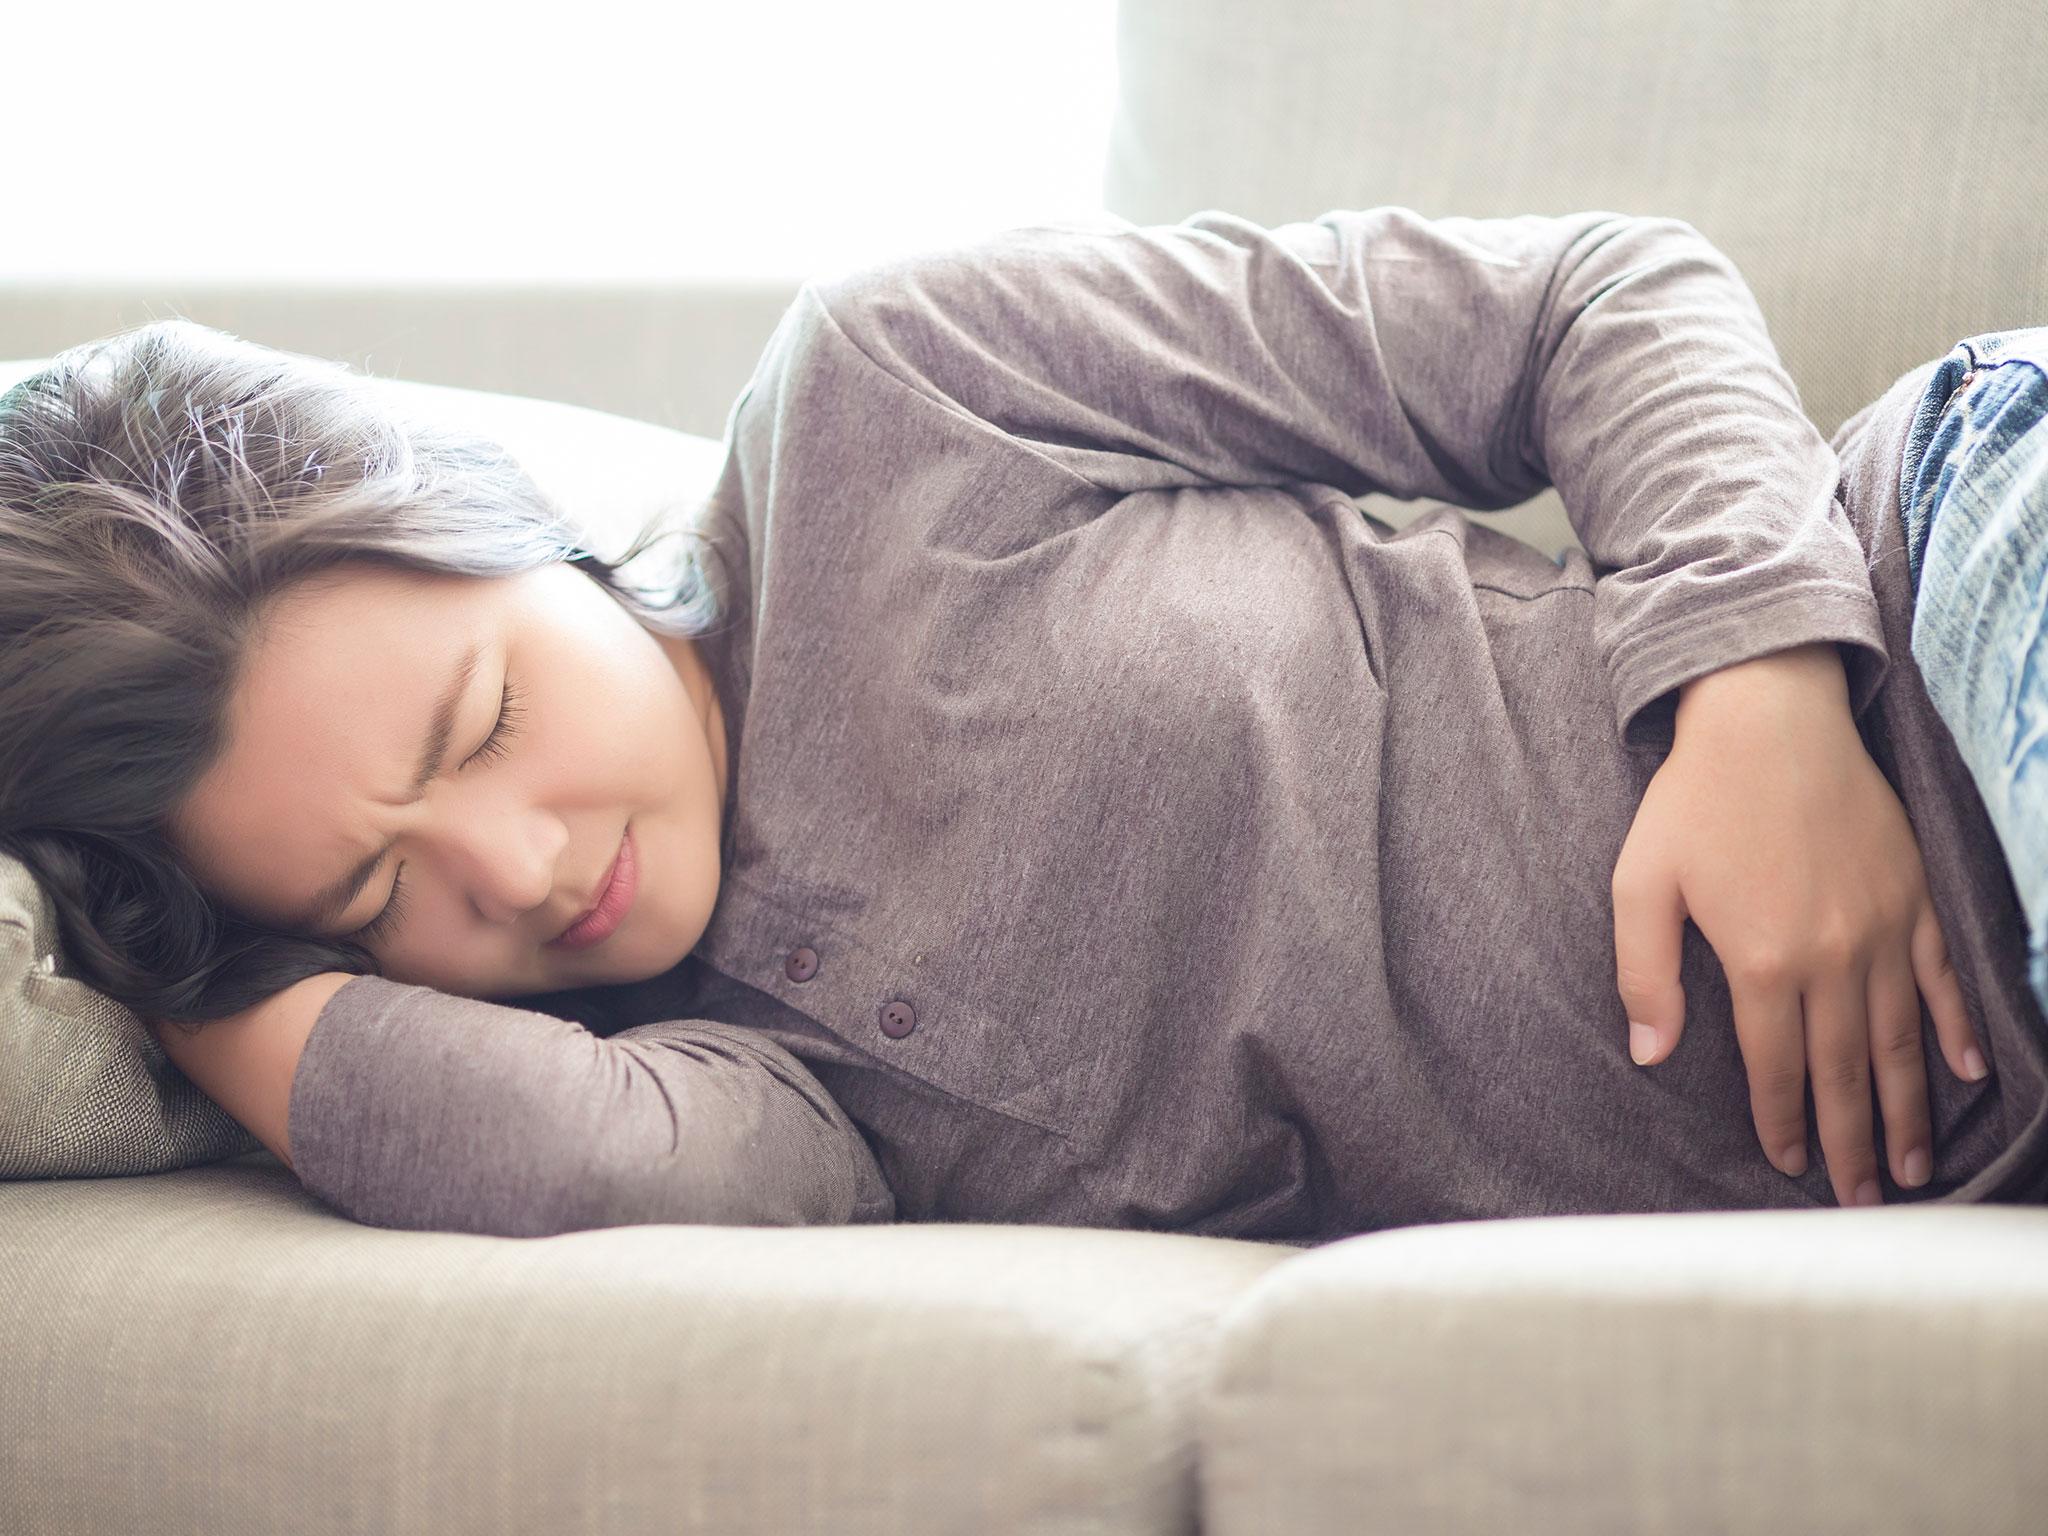 Stomach pain is among the symptoms of coeliac disease